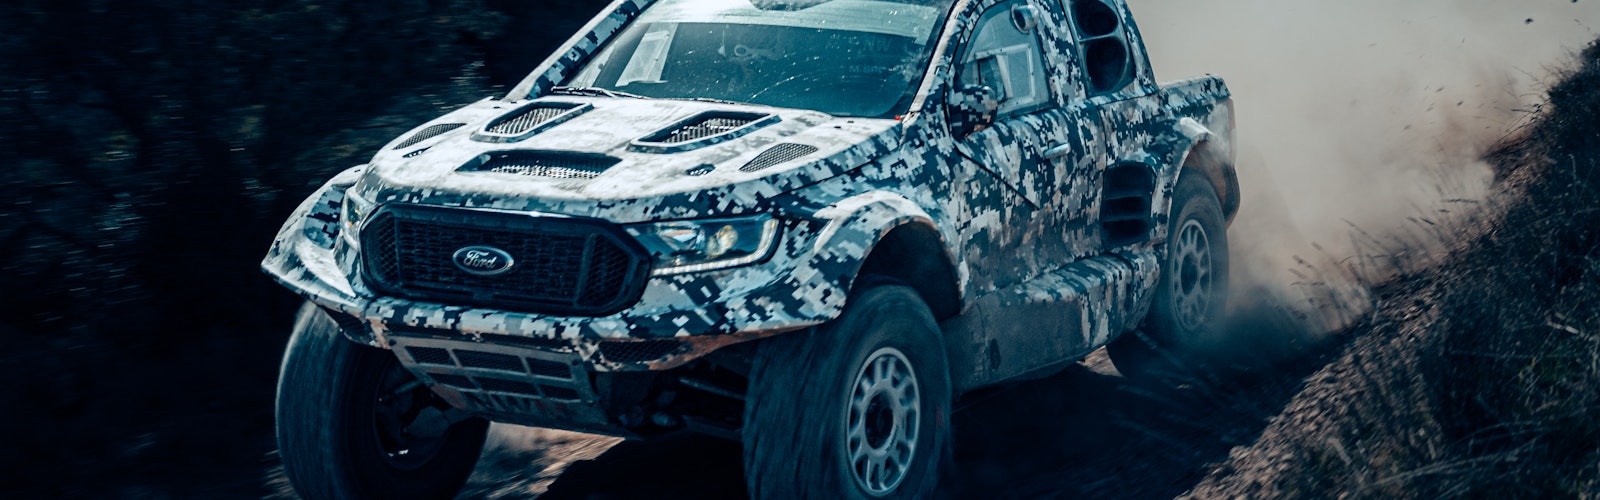 Ford Performance Preps to Race Ultimate ‘Bad-Ass’ Ranger Rap